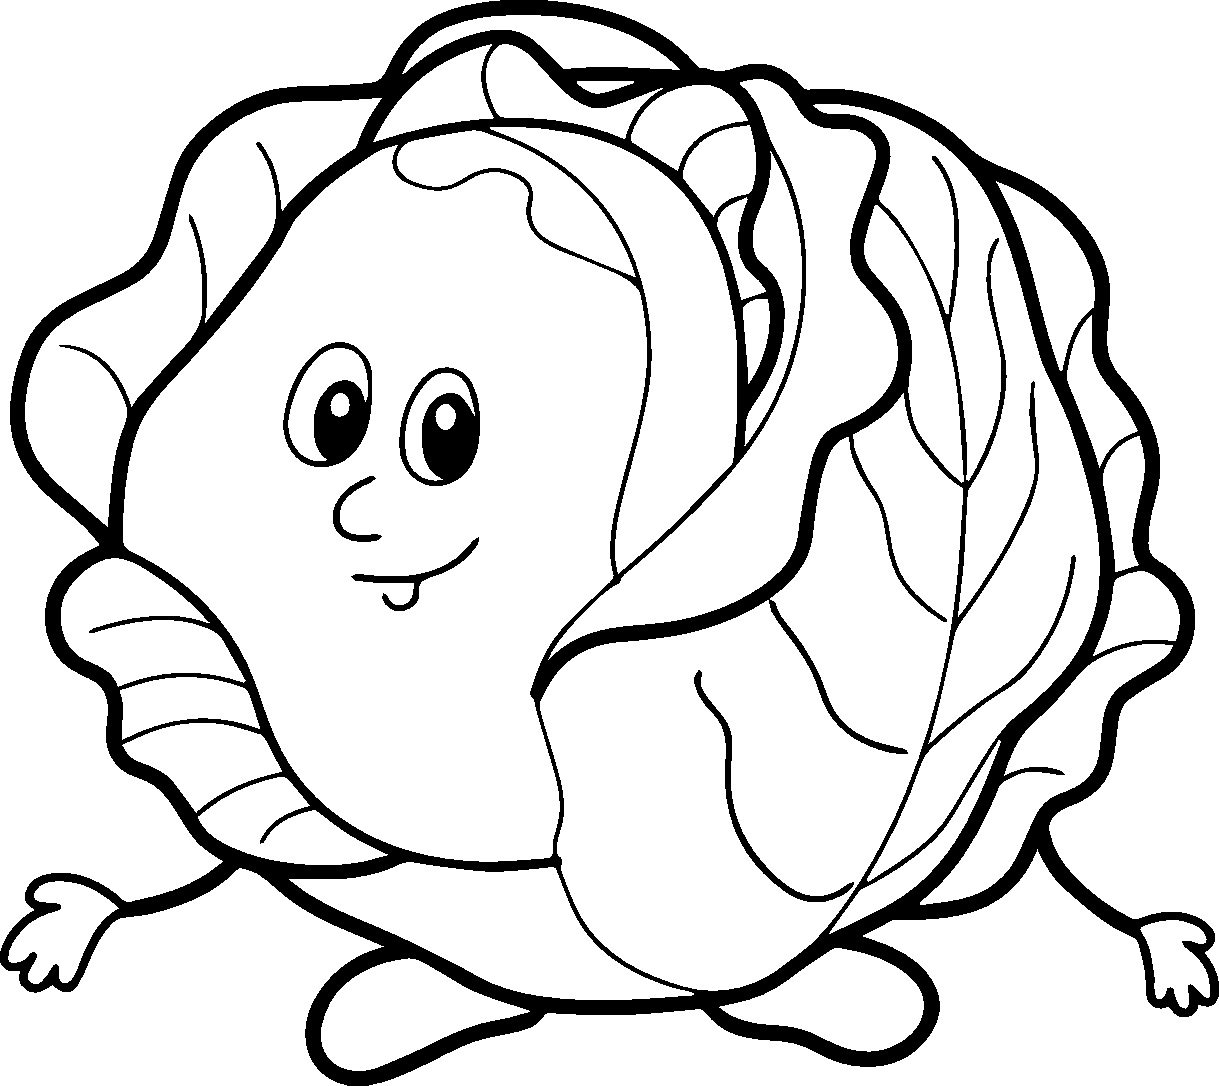 Vegetable Drawing For Kids Images & Pictures - Becuo